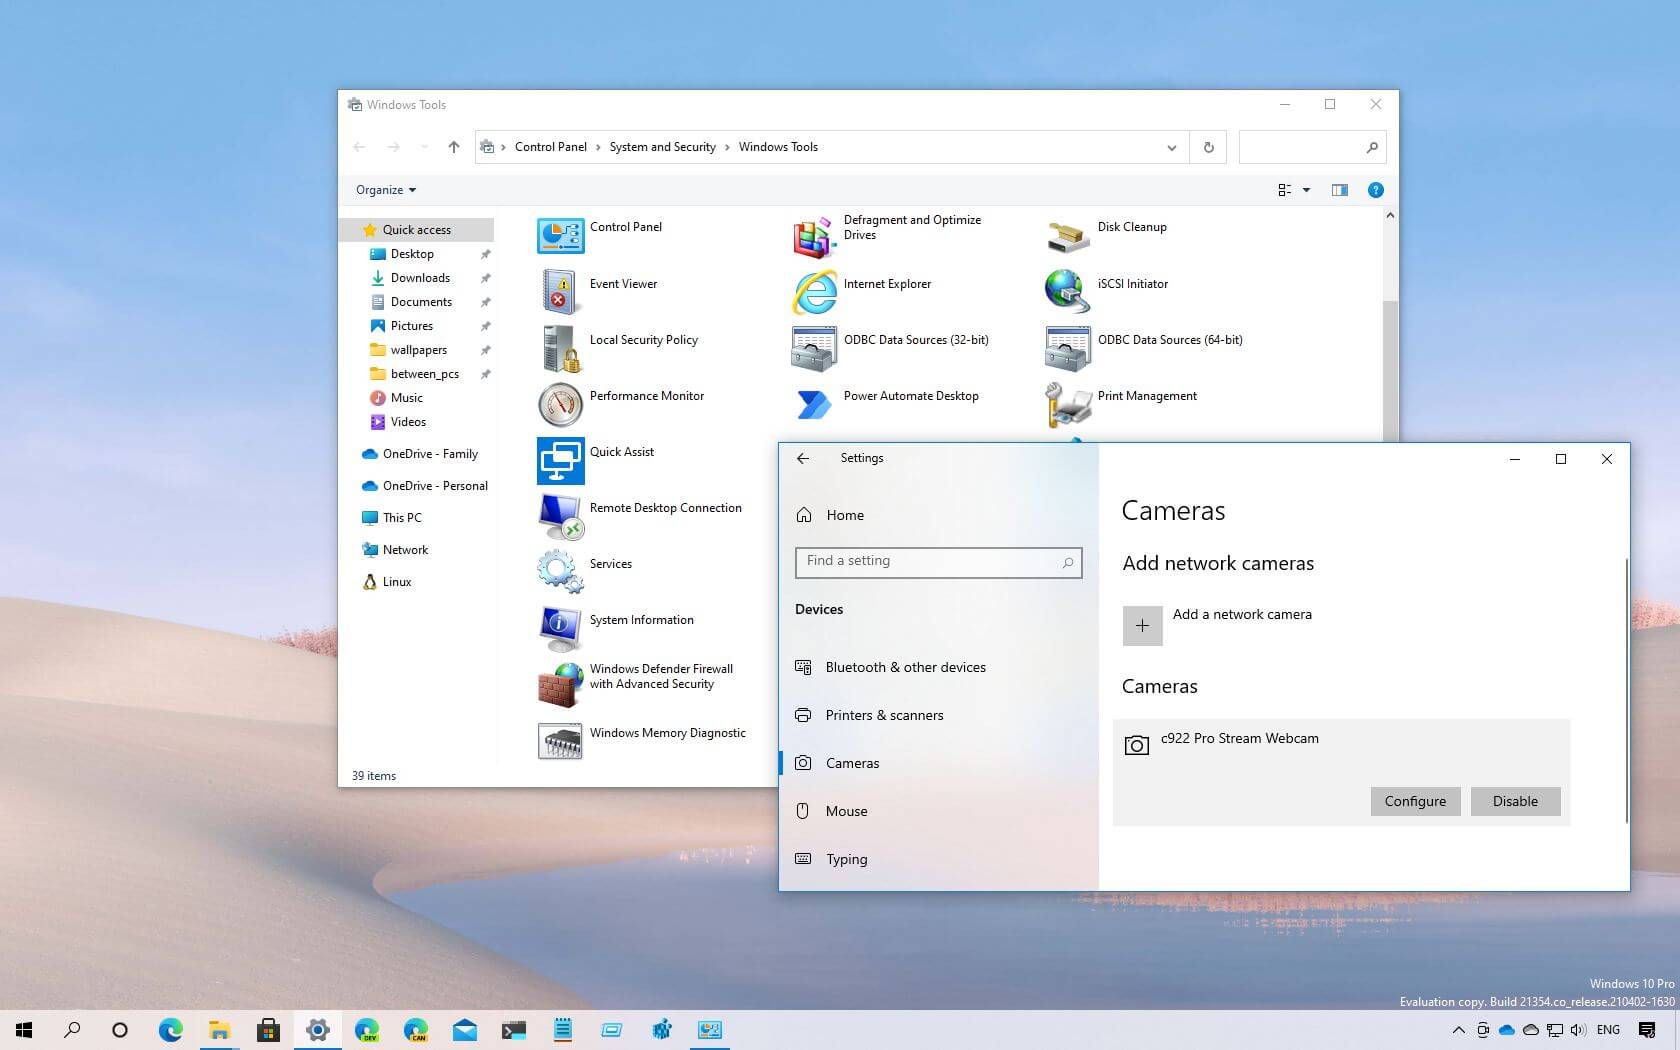 How to check app is 64-bit or 32-bit on Windows 10 - Pureinfotech